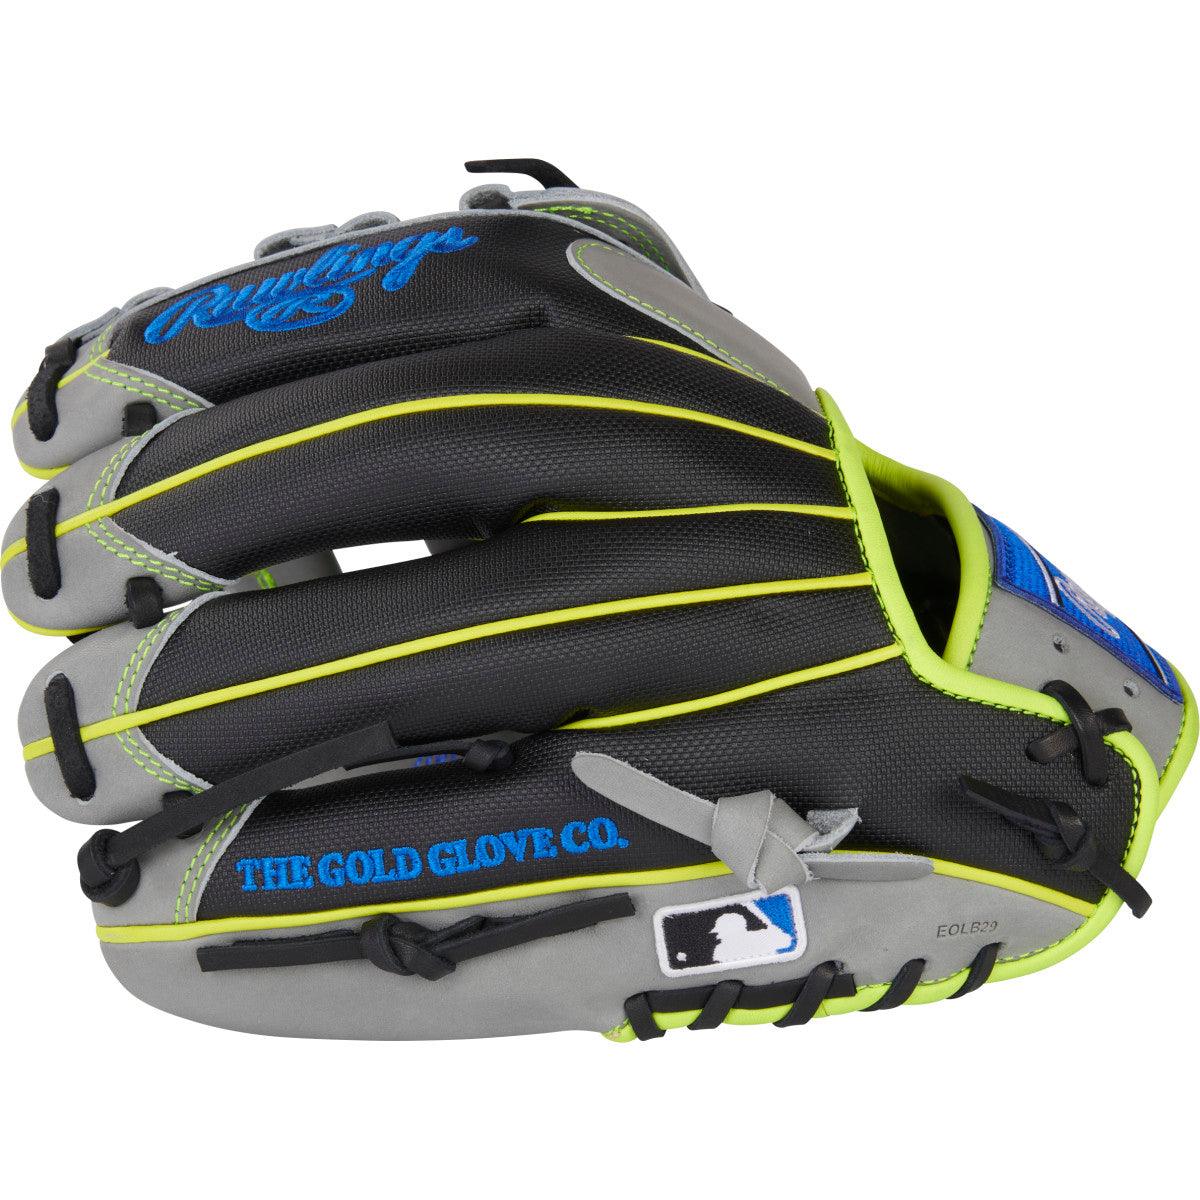 2022 Rawlings Heart of the Hide 11.75